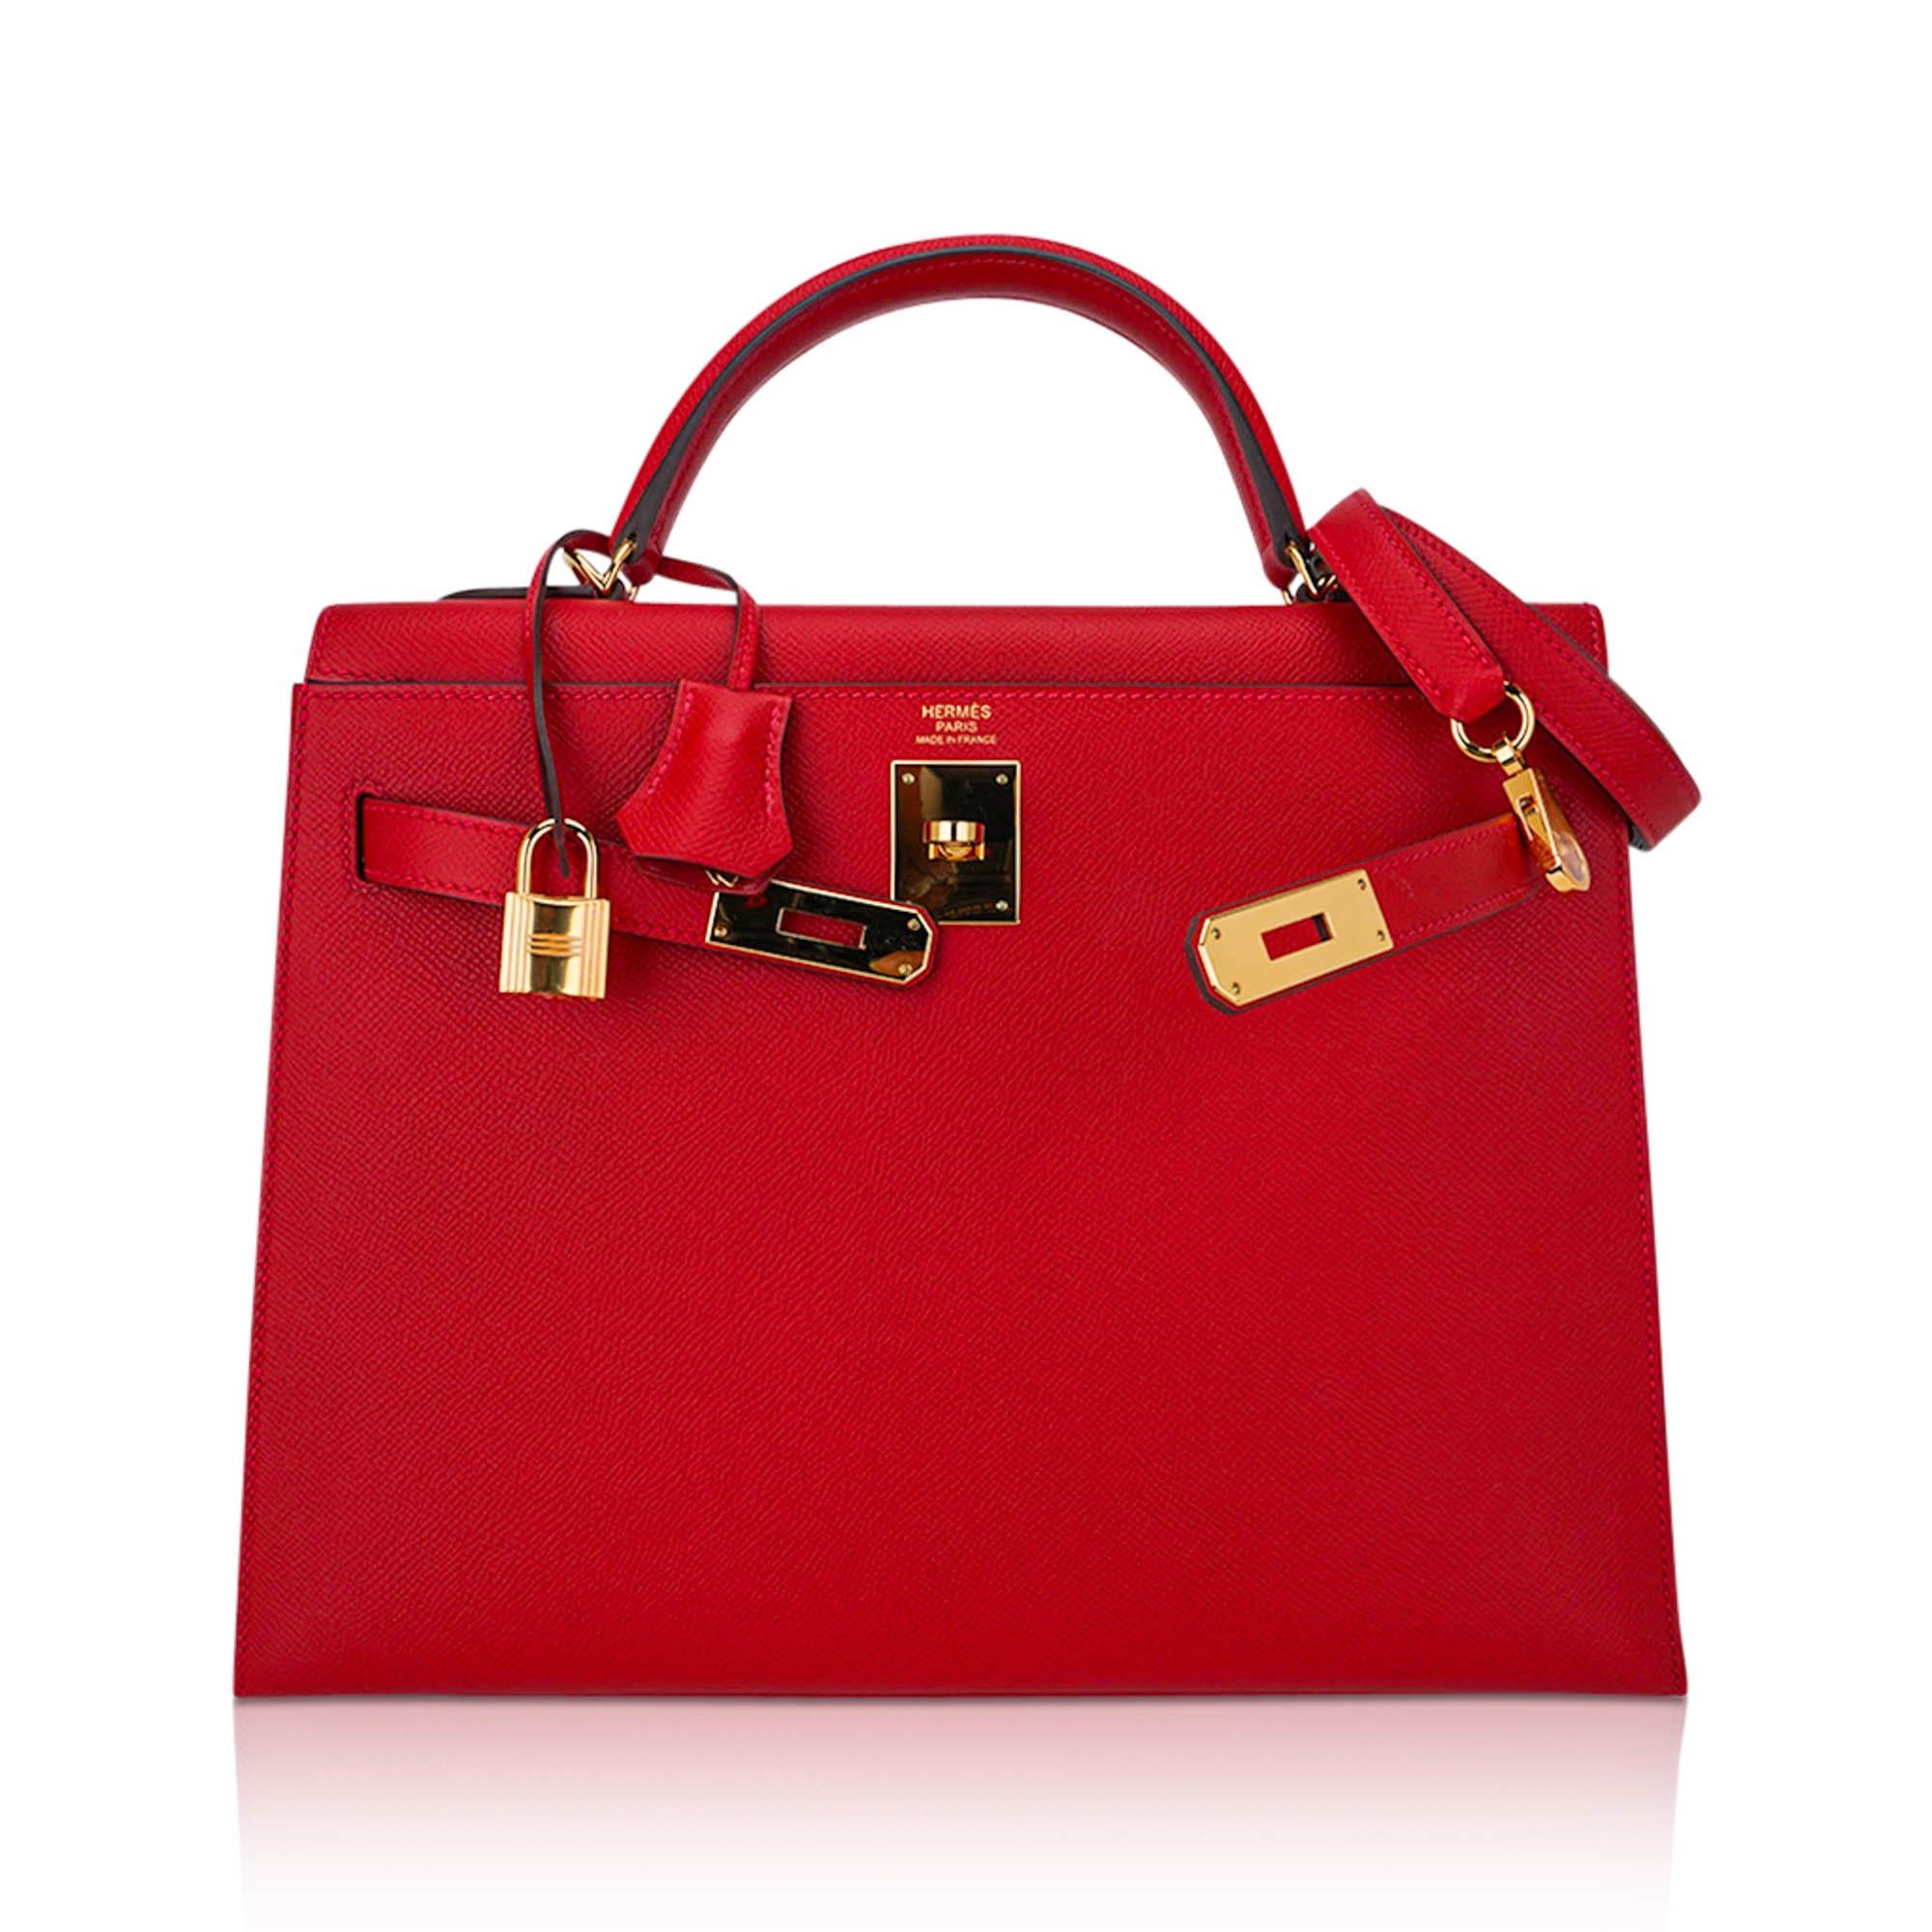 Hermes Kelly 32 Sellier Bag Rouge Casaque Epsom Leather Gold Hardware In Good Condition For Sale In Miami, FL